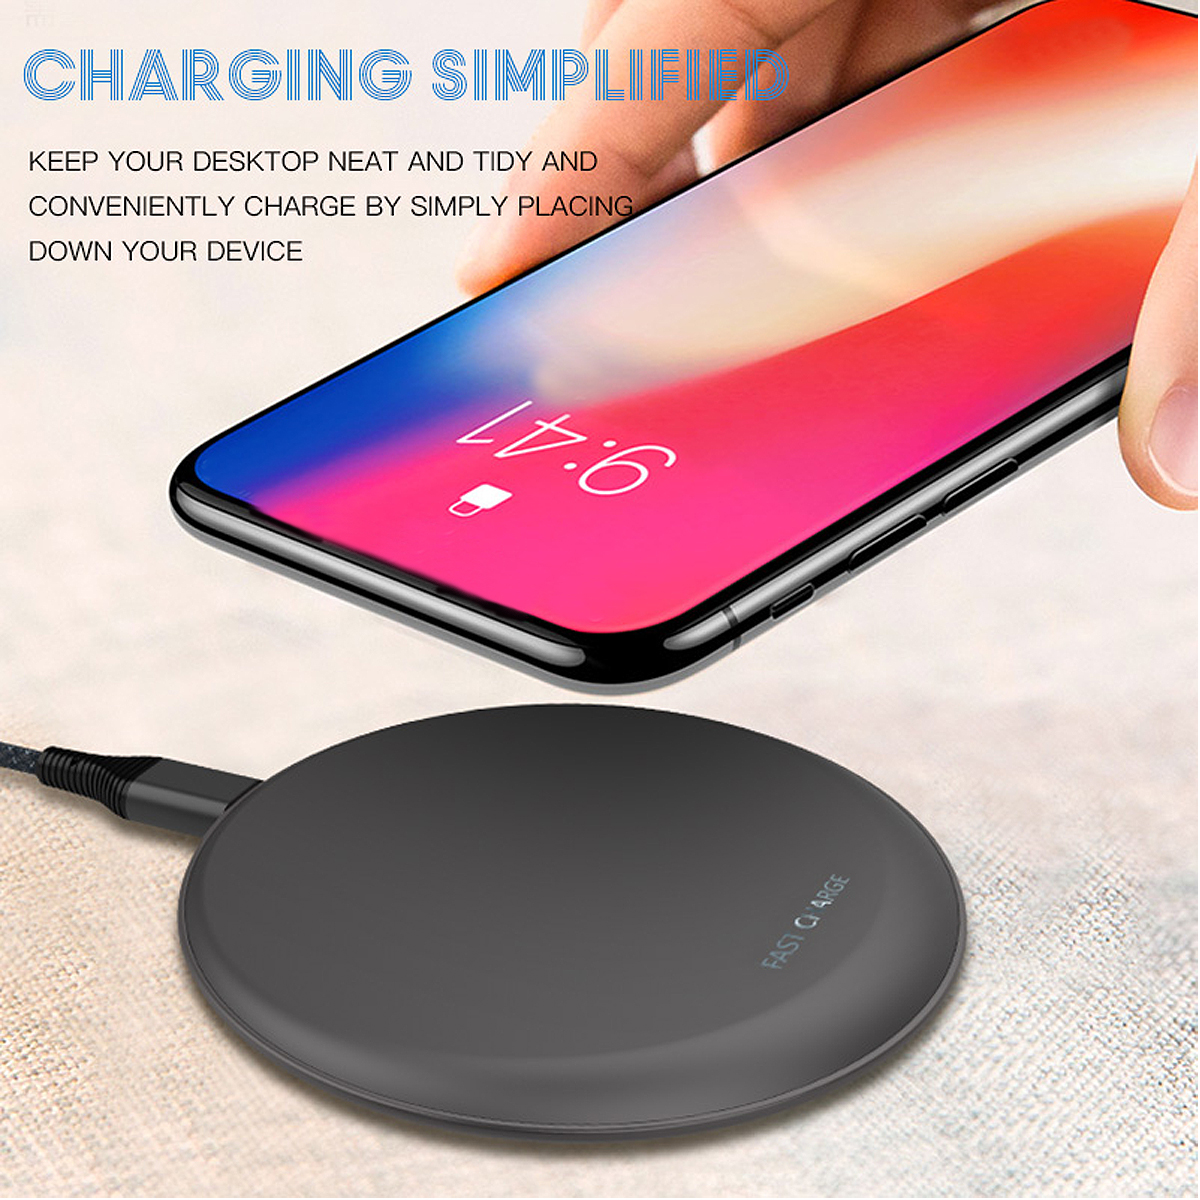 10W-Qi-Standard-9V-Fast-Wireless-Desktop-Charger-Pad-for-iPhone-X-8-Plus-Galaxy-S8-S9-Note-8-1263428